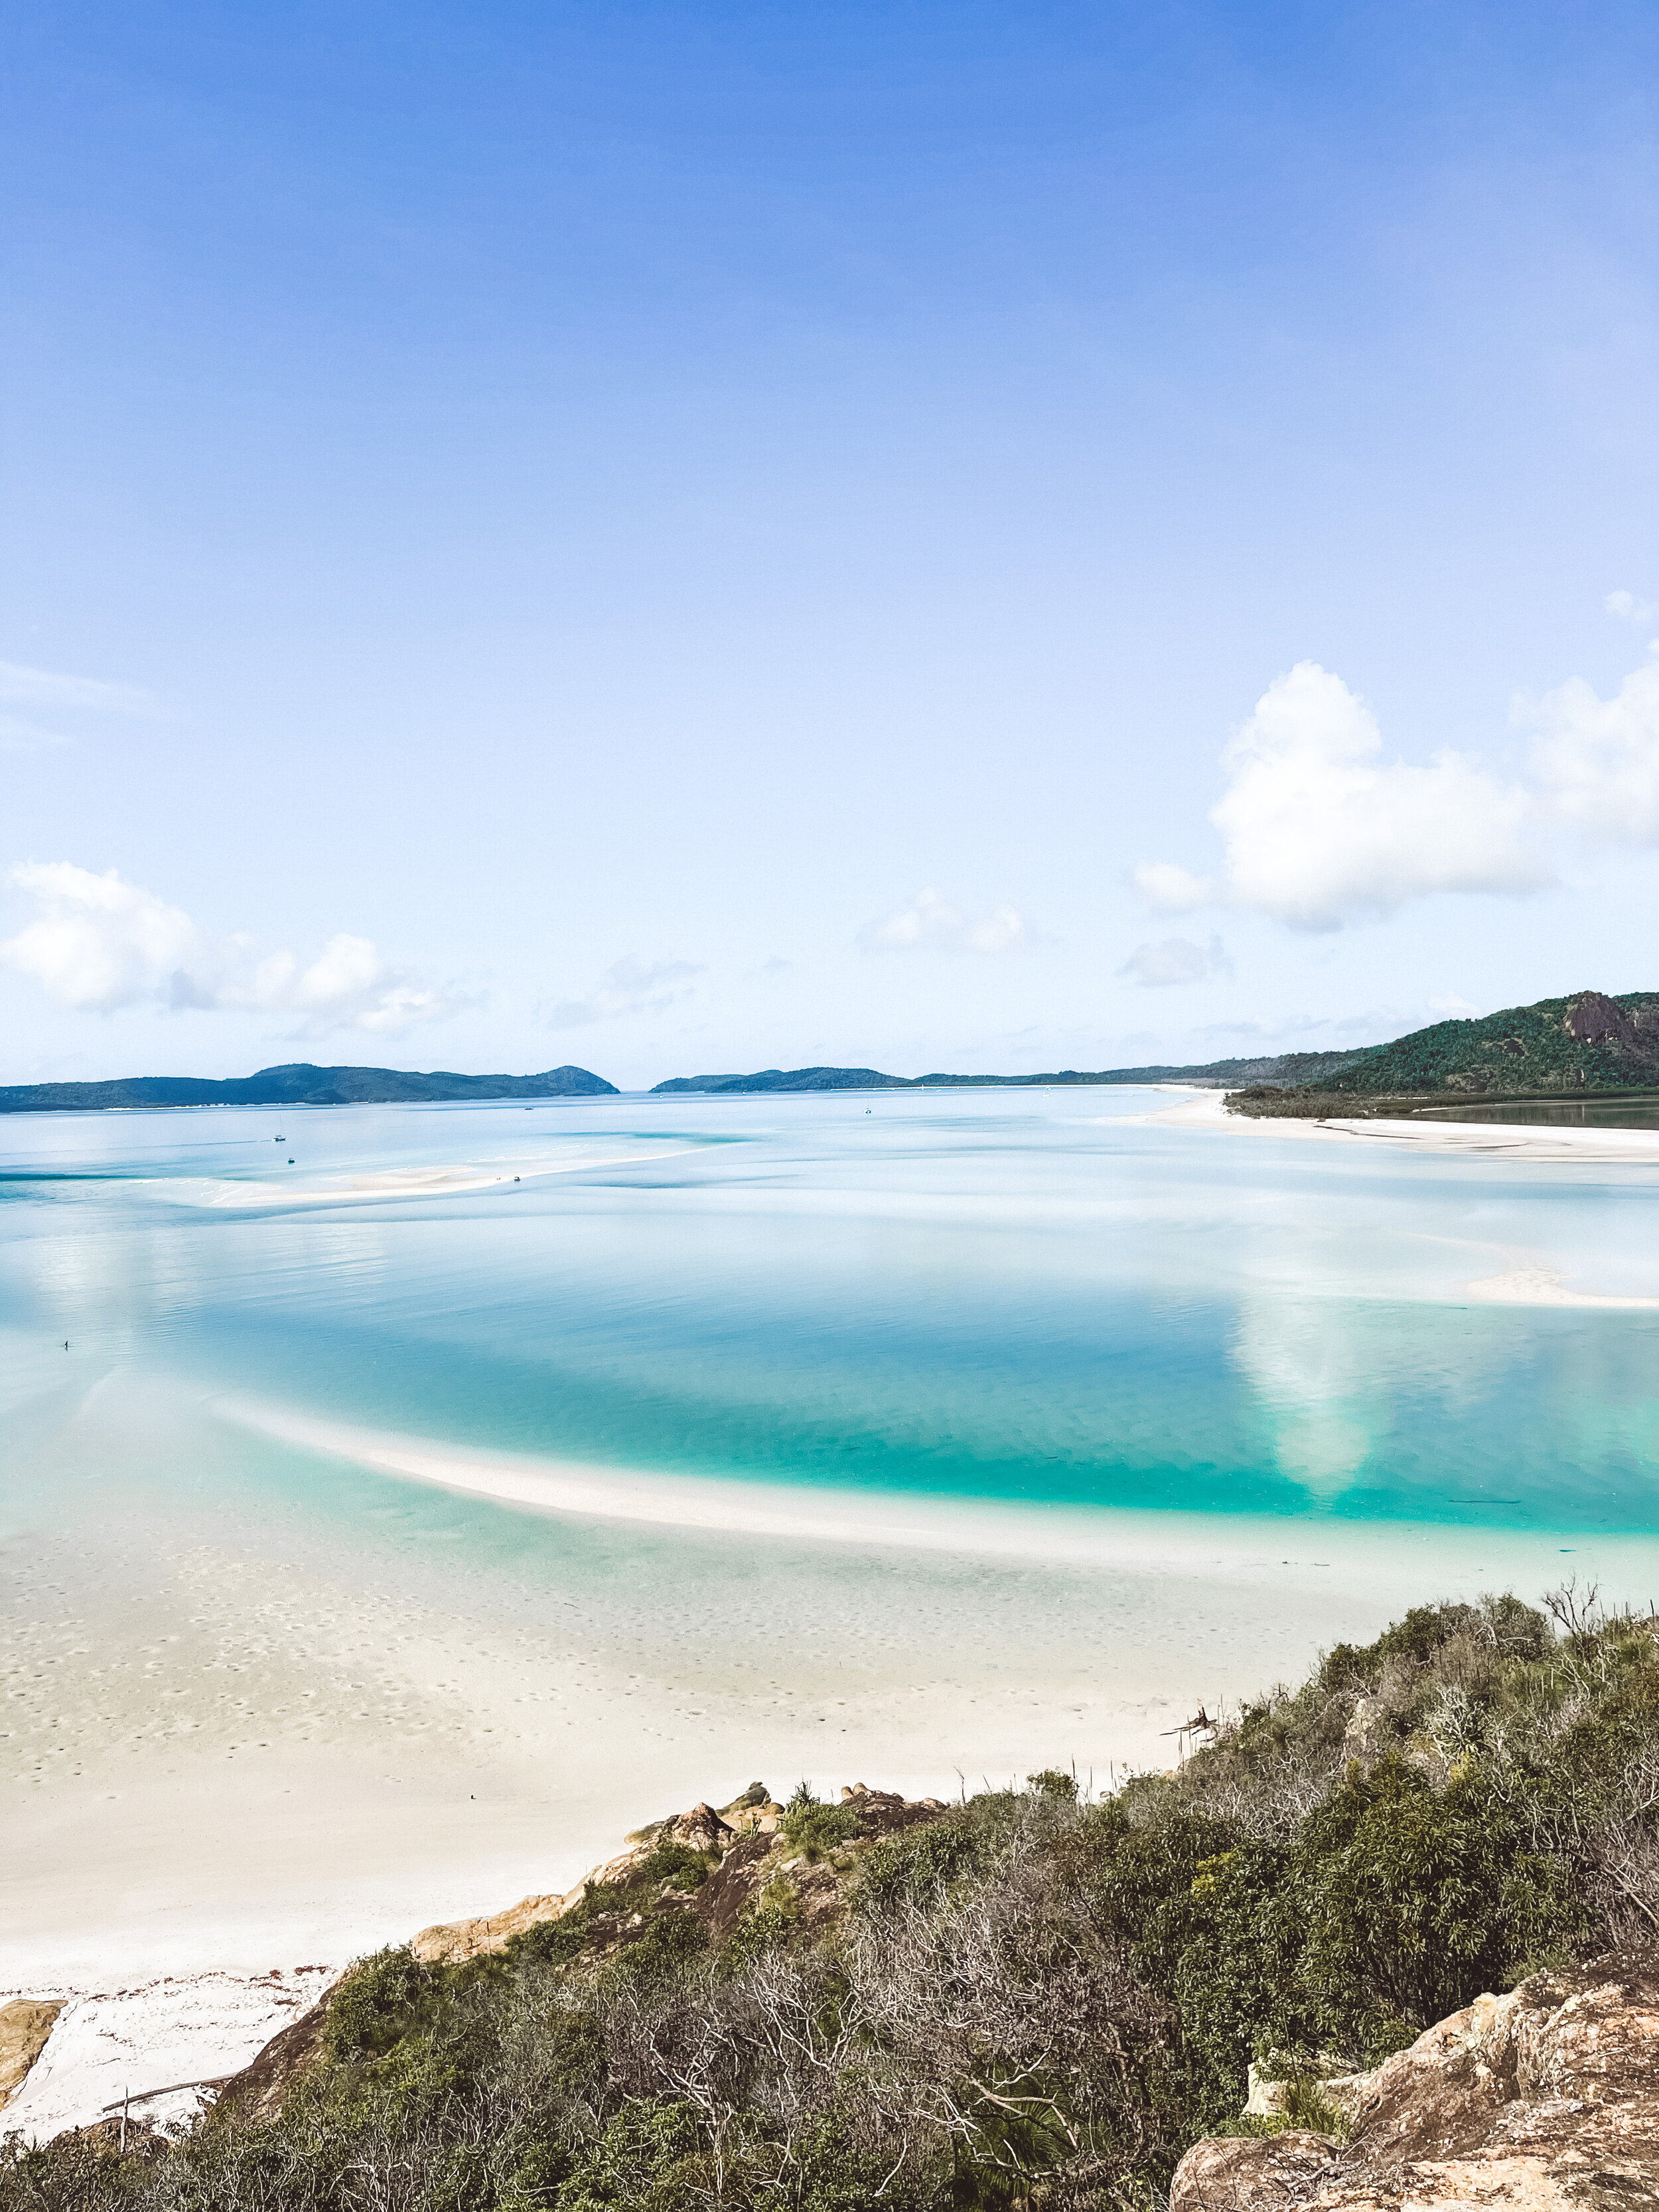 Hill Inlet Lookout - Airlie Beach - Whitsundays - Tropical North Queensland (QLD) - Australie